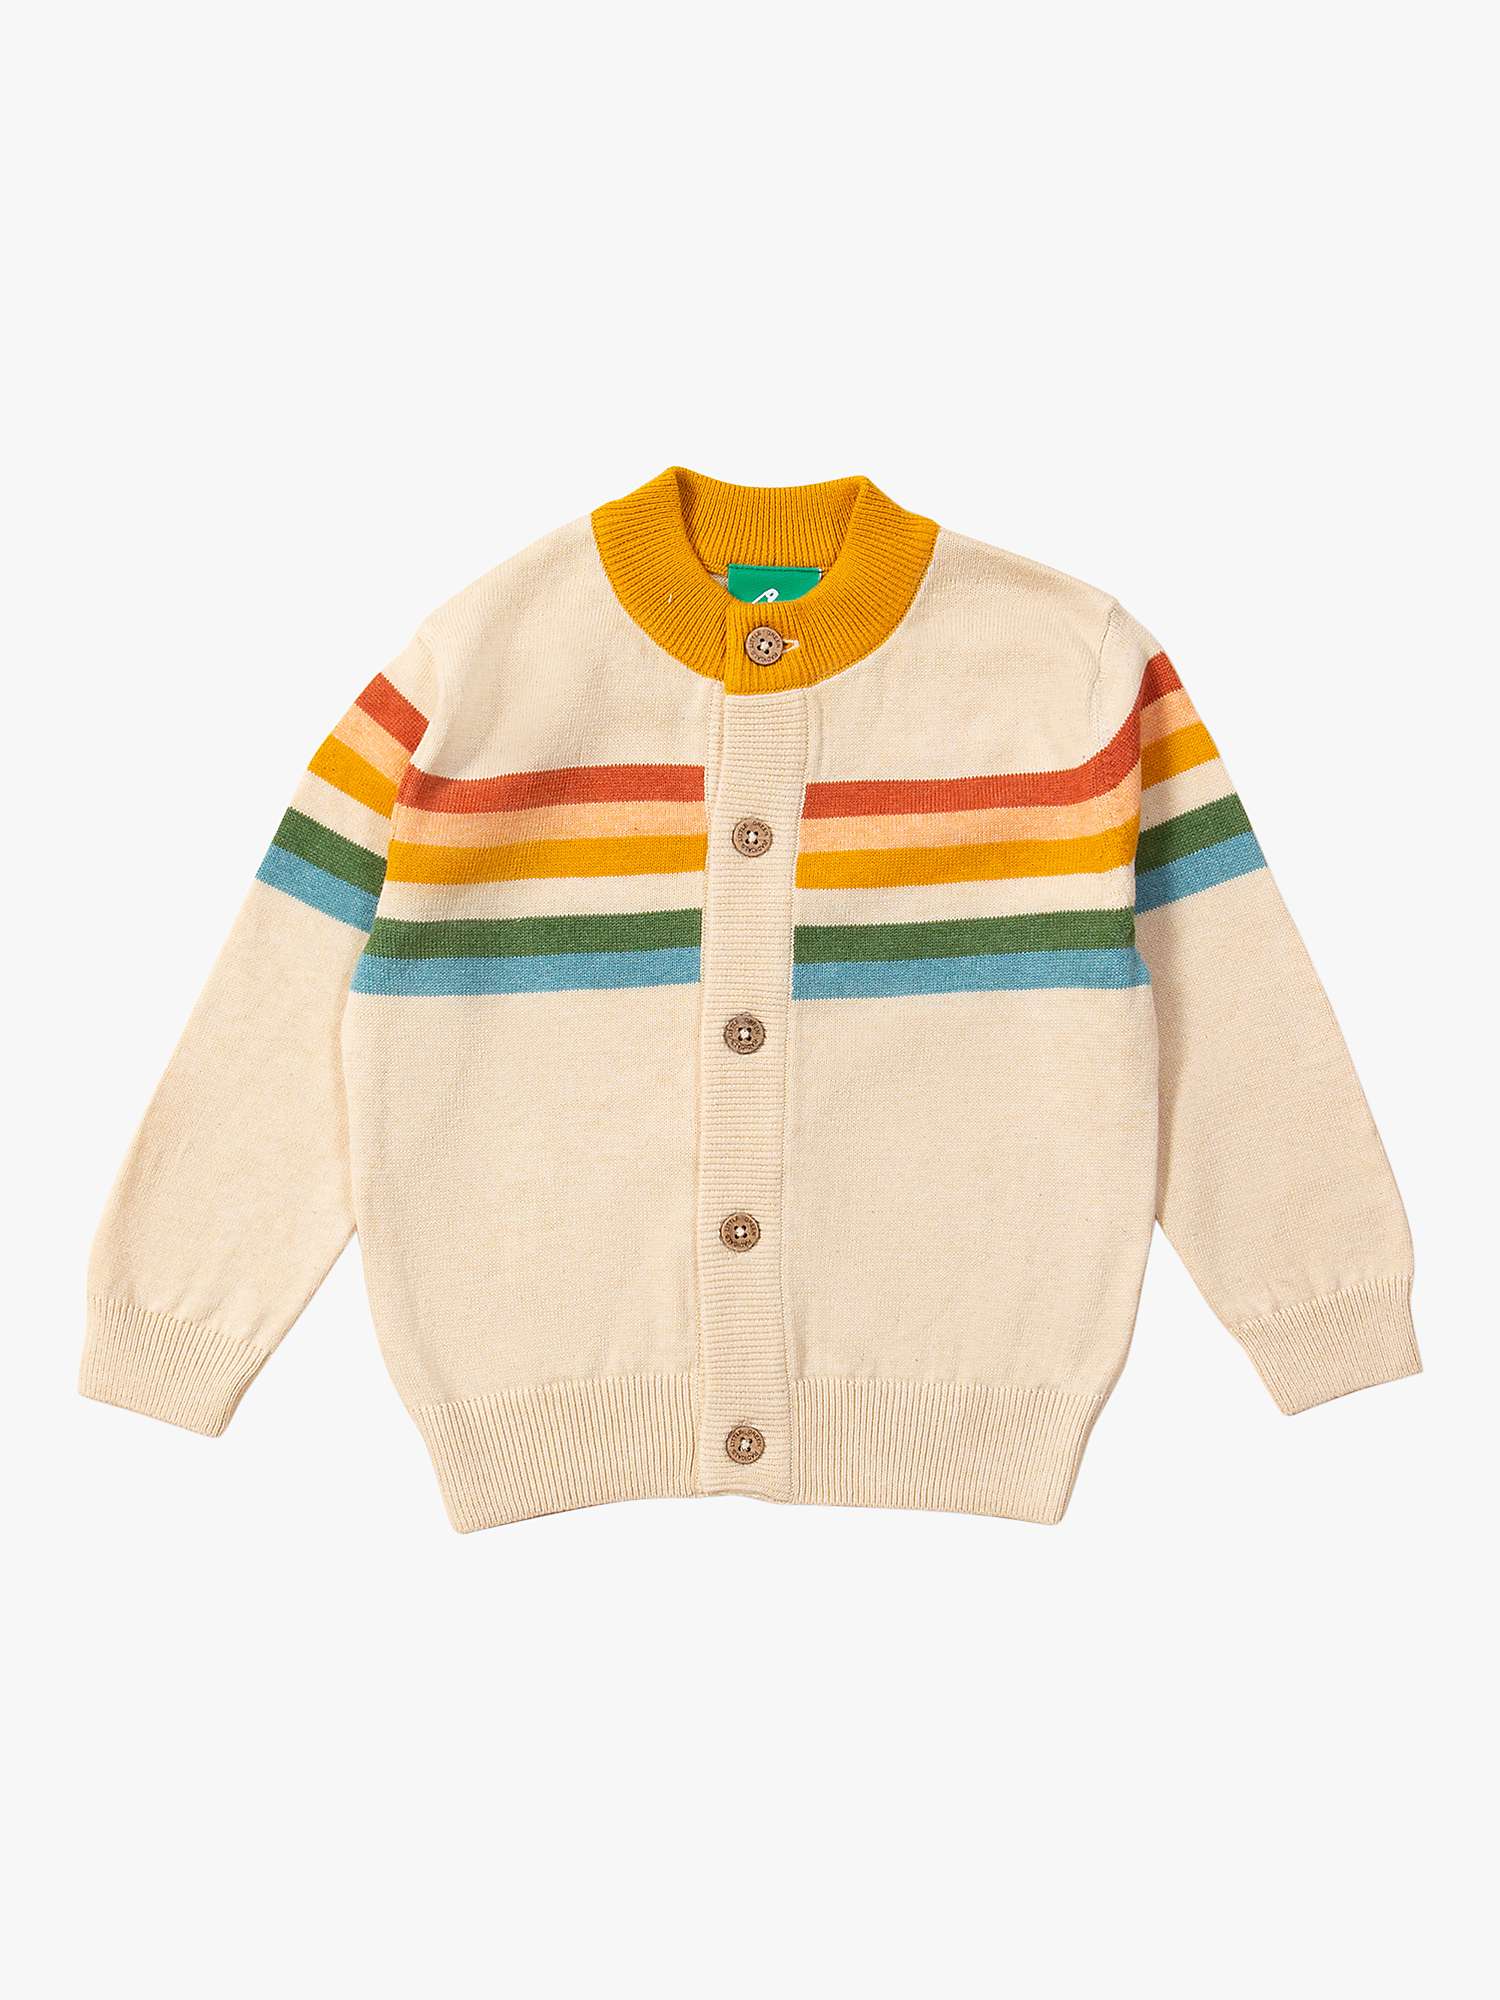 Buy Little Green Radicals Baby Organic Cotton From One To Another Rainbow Stripe Knit Cardigan, Oatmeal Online at johnlewis.com